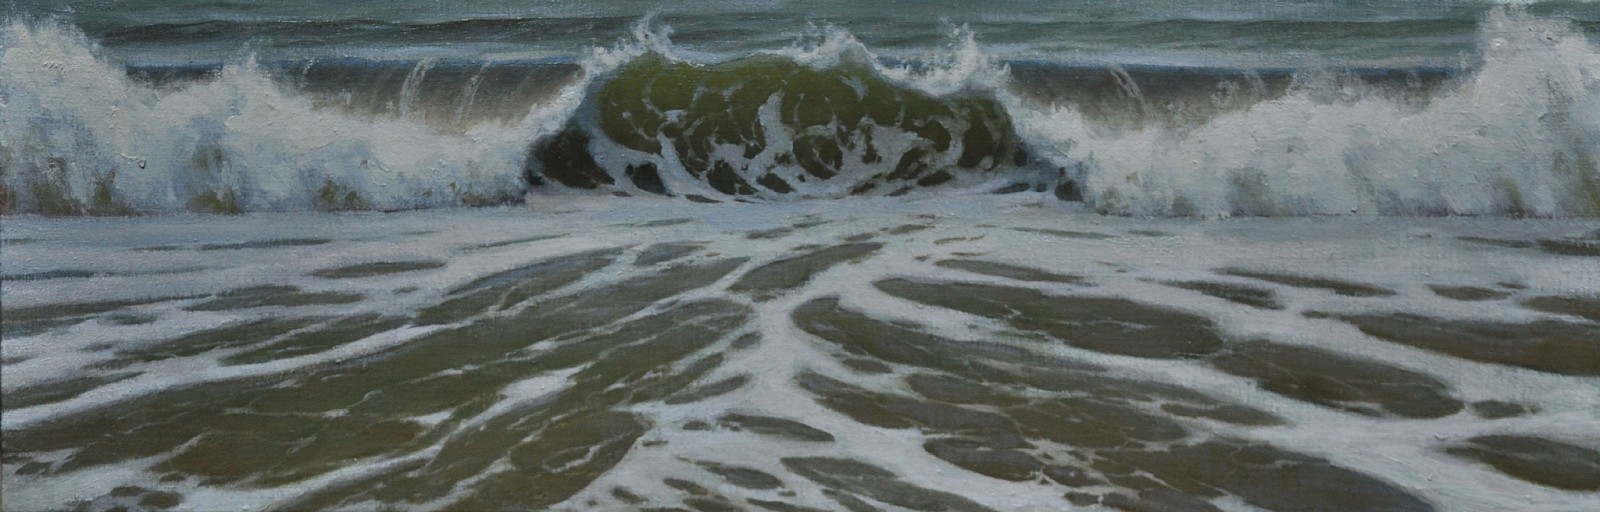 Edward Minoff, Convergence No. 2, 2018
oil on linen on panel, 8 x 24 in. (20.3 x 61 cm)